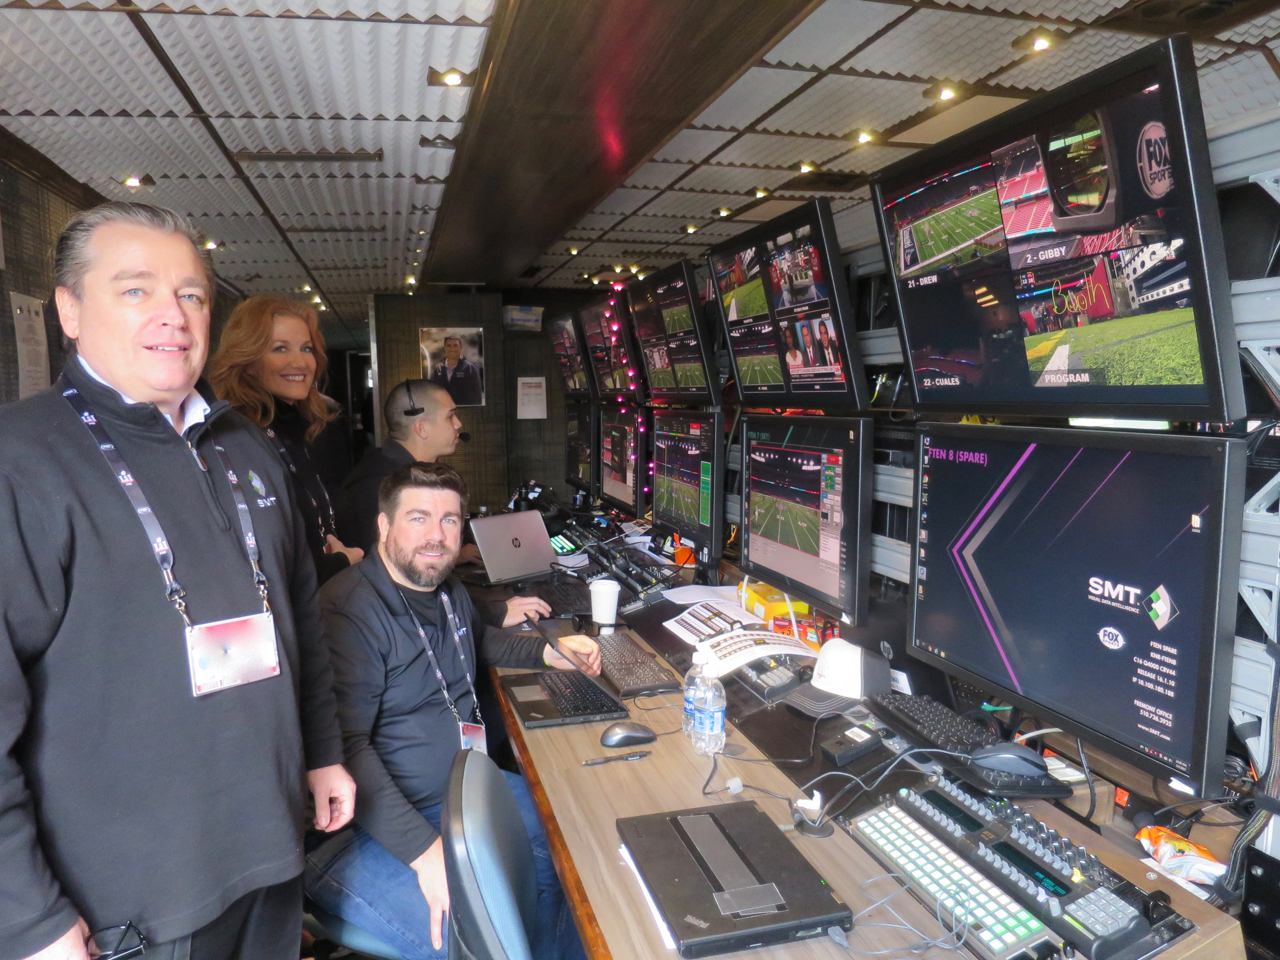 SMT's Gerard Hall (left) and Patricia Hopkins (center) with the SMT production team at Super Bowl LI.